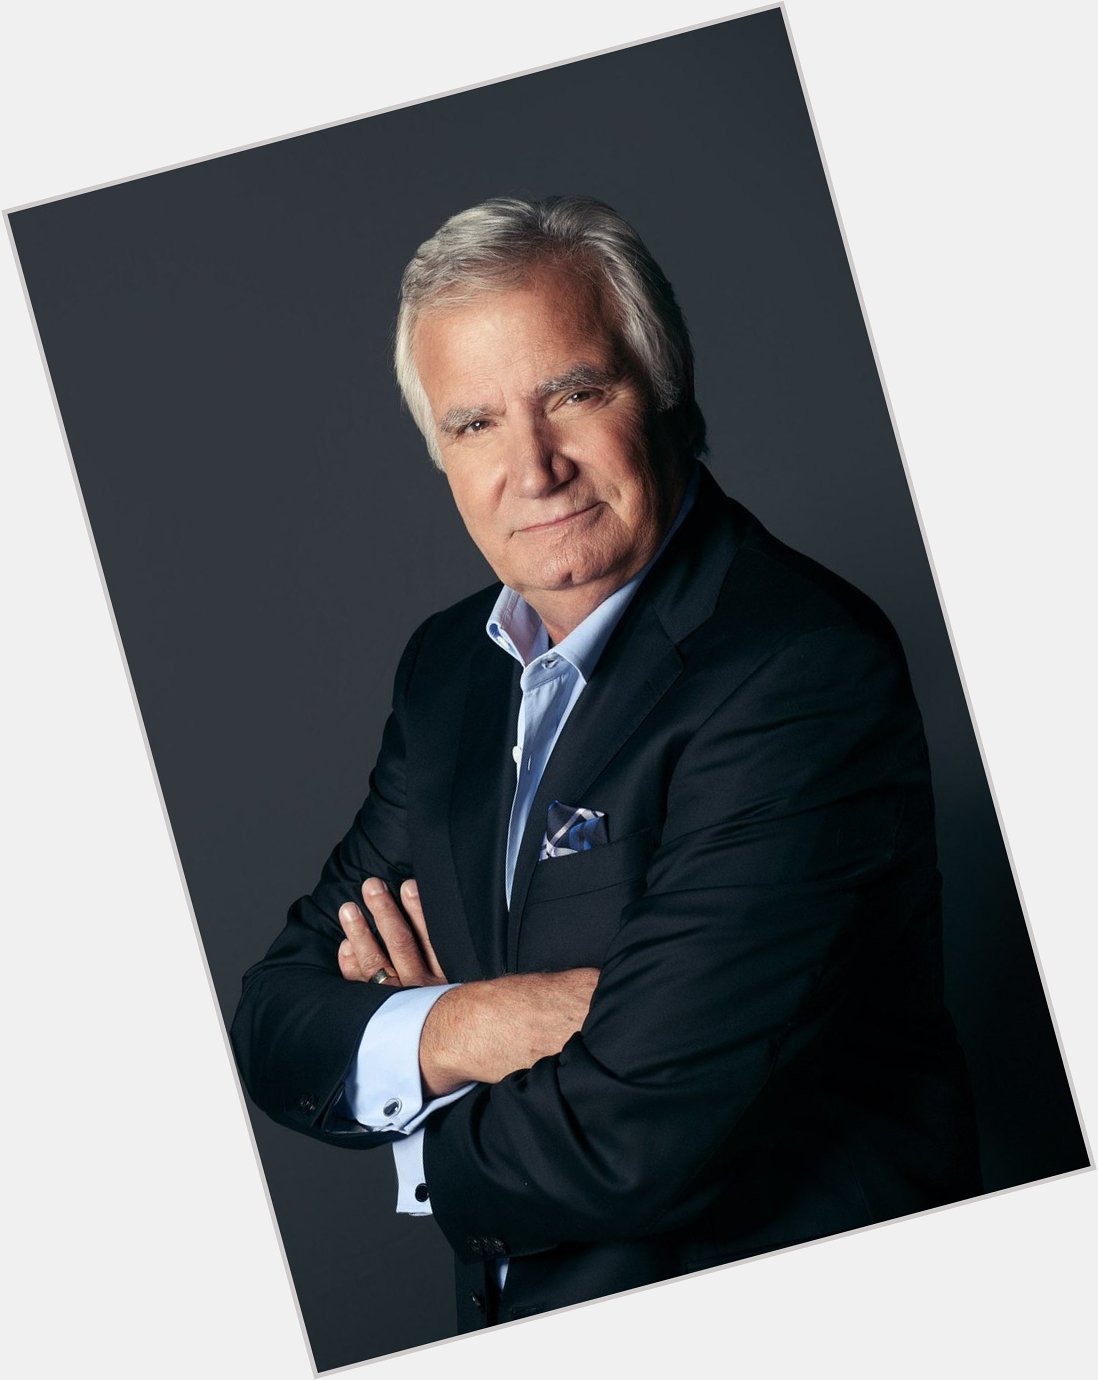 Happy Birthday to John McCook Eric Forrester          I wish you good health and happiness     